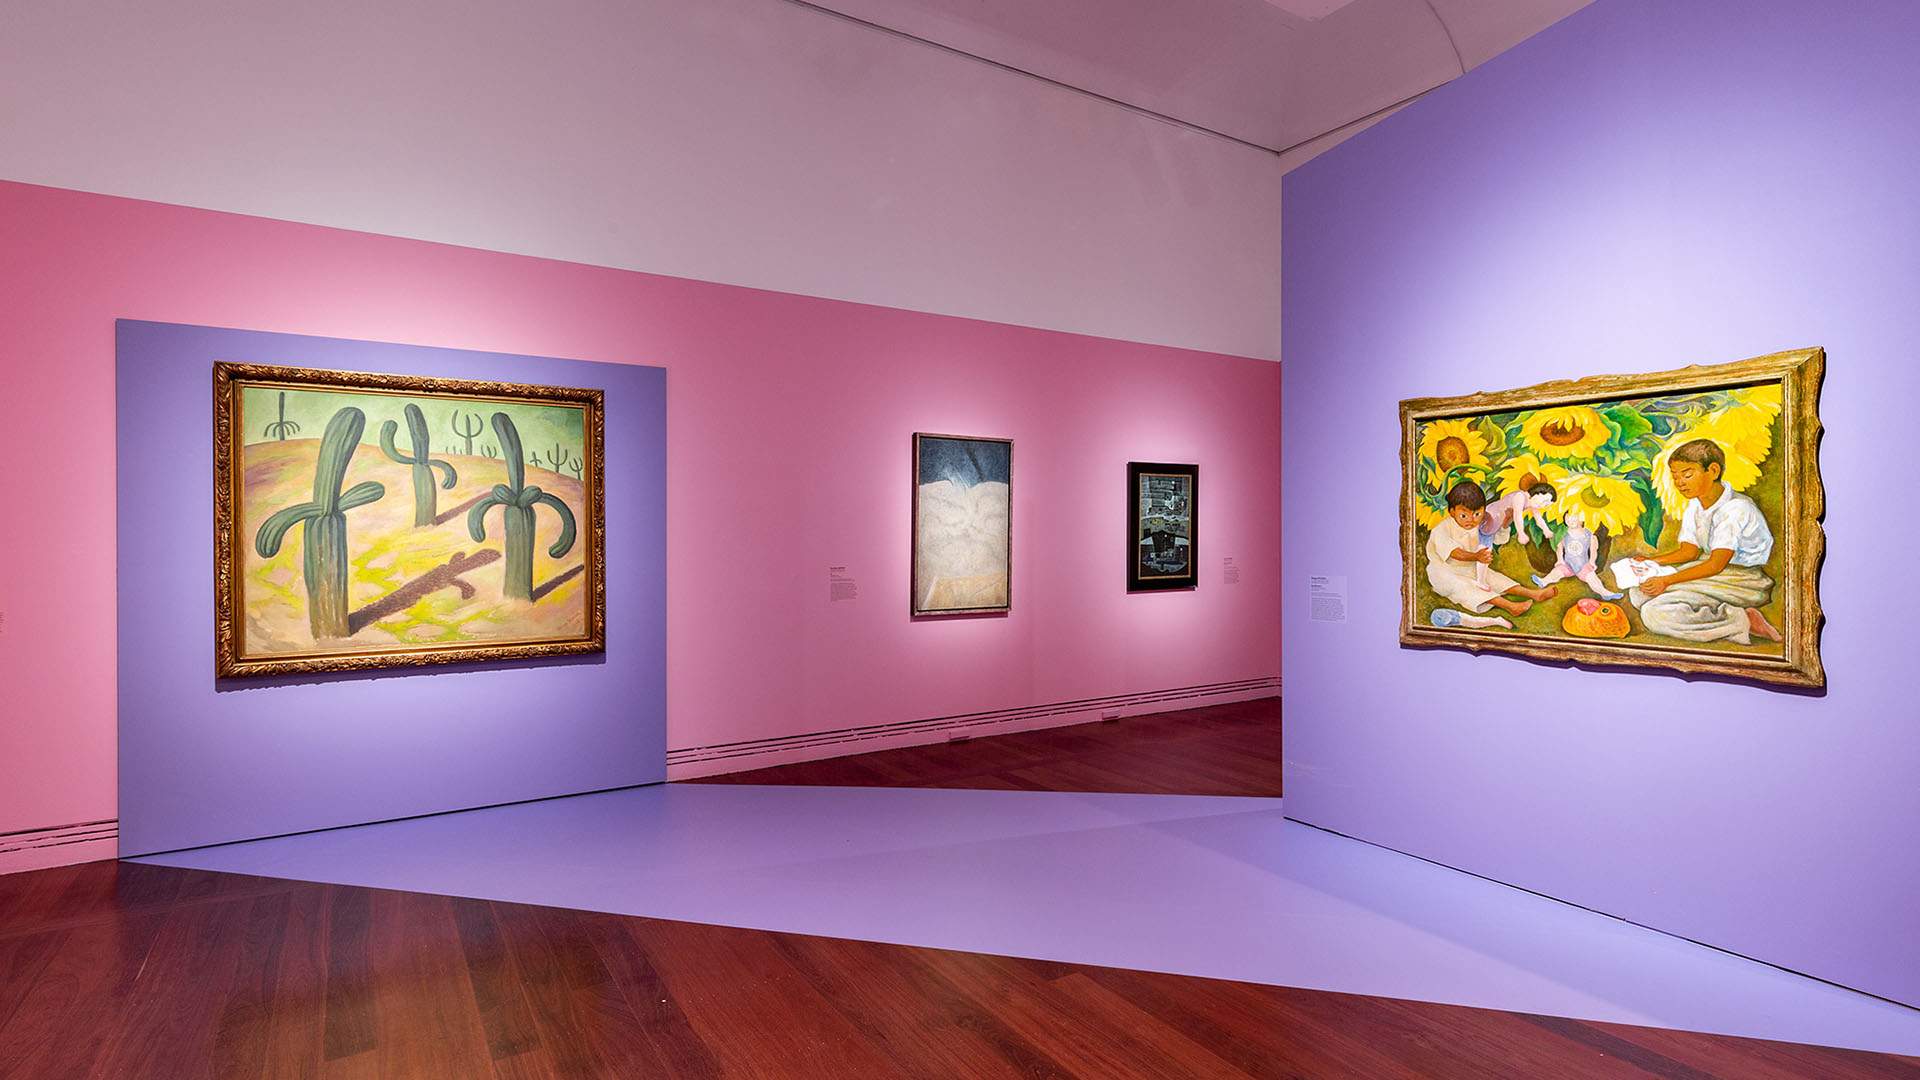 Now Open: A Stunning Frida Kahlo, Diego Rivera and Mexican Modernism Exhibition Has Arrived in Australia